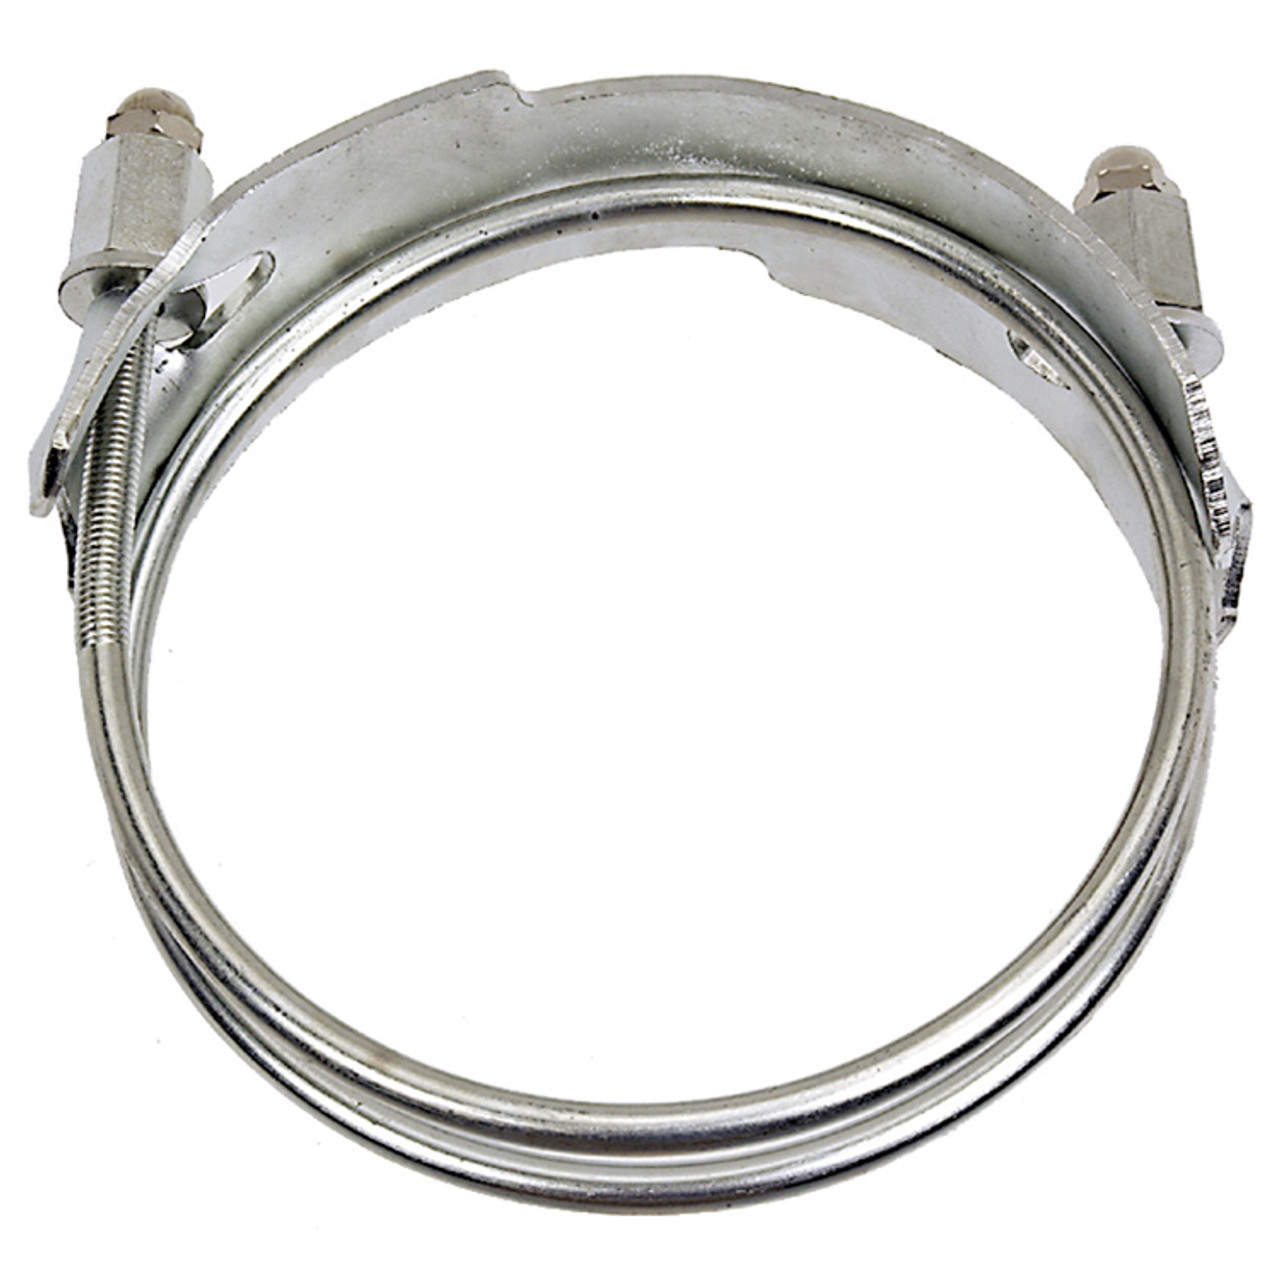 5" Counter-Clockwise Spiral Bolt Clamp  G38W-500